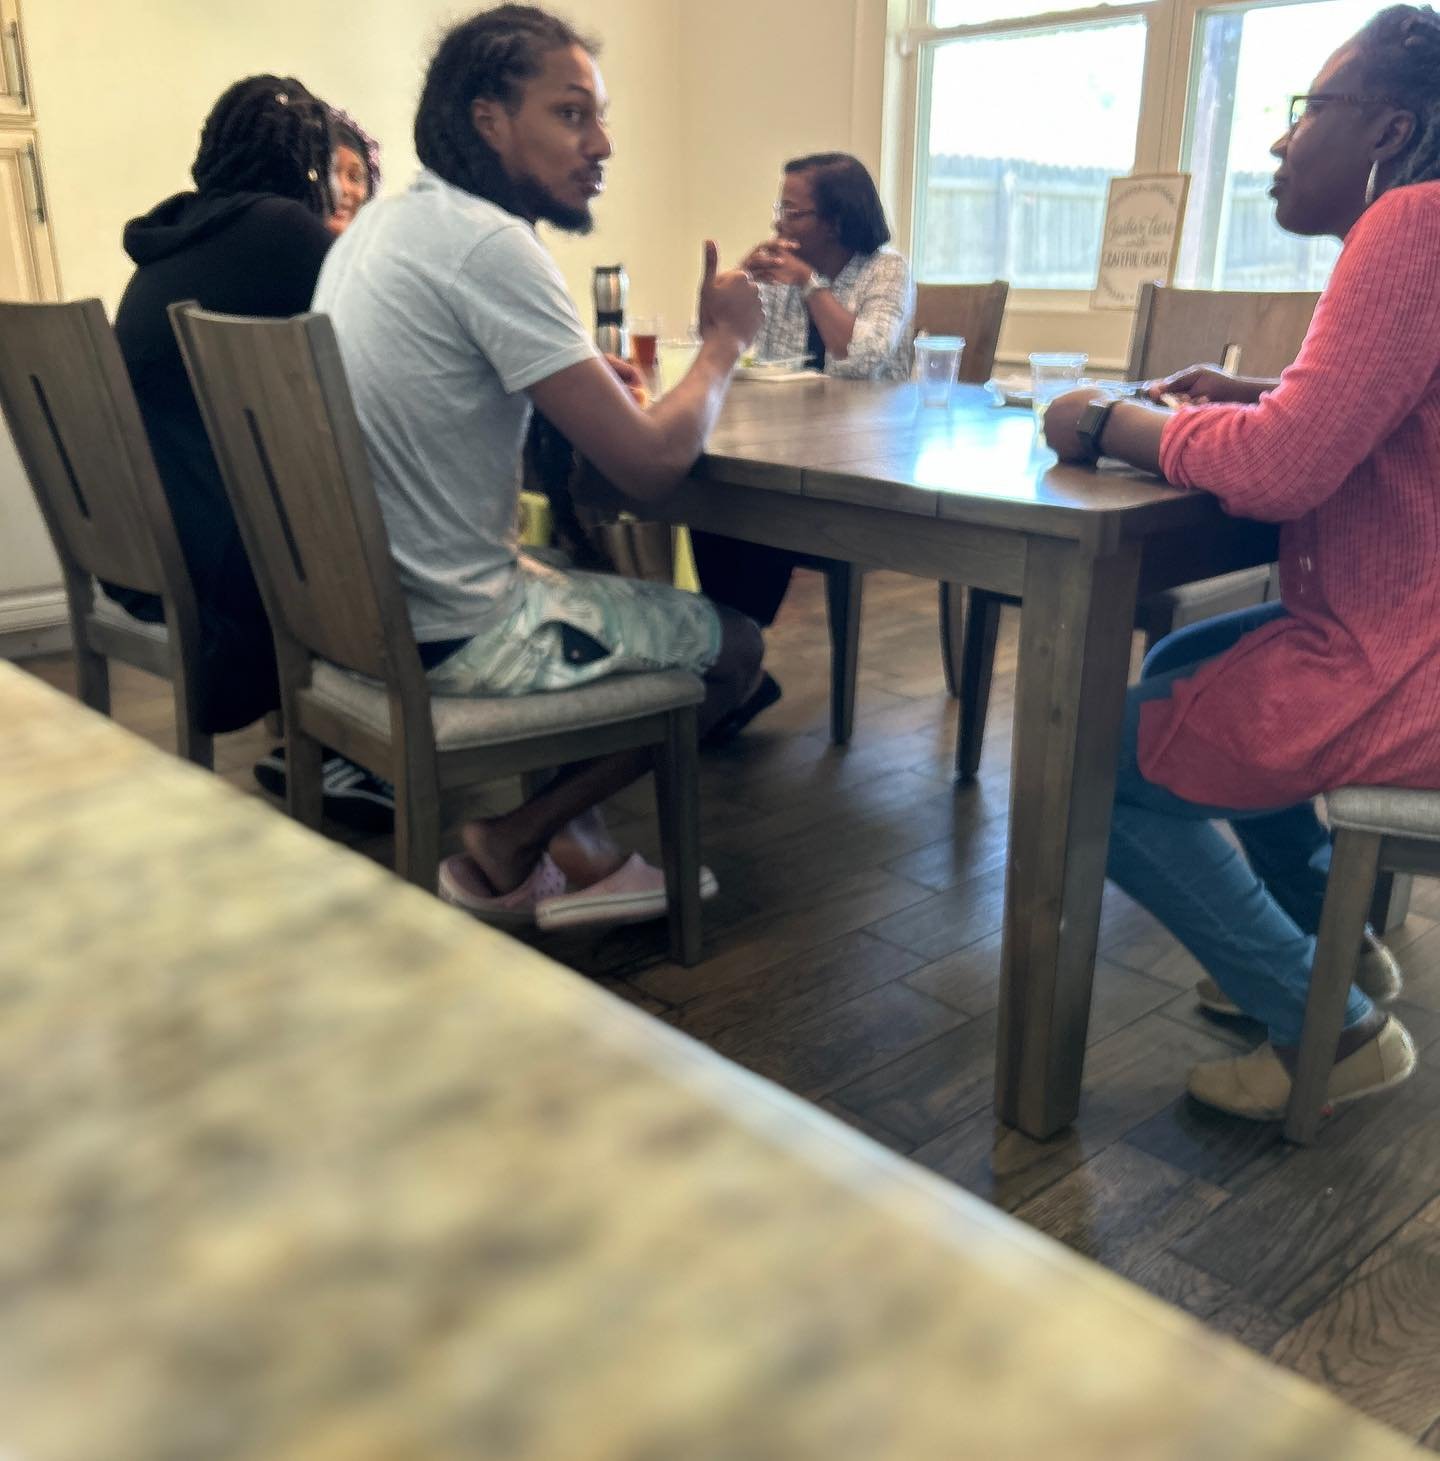 A special time of devotion for our Vineyard team, pausing and taking time to time to reflect, practice gratitude and uplift one another while caring for and safekeeping our teens. 

.
.
.
.
#adopt #fostercare #churches ##fosterlove #belovemadevisible